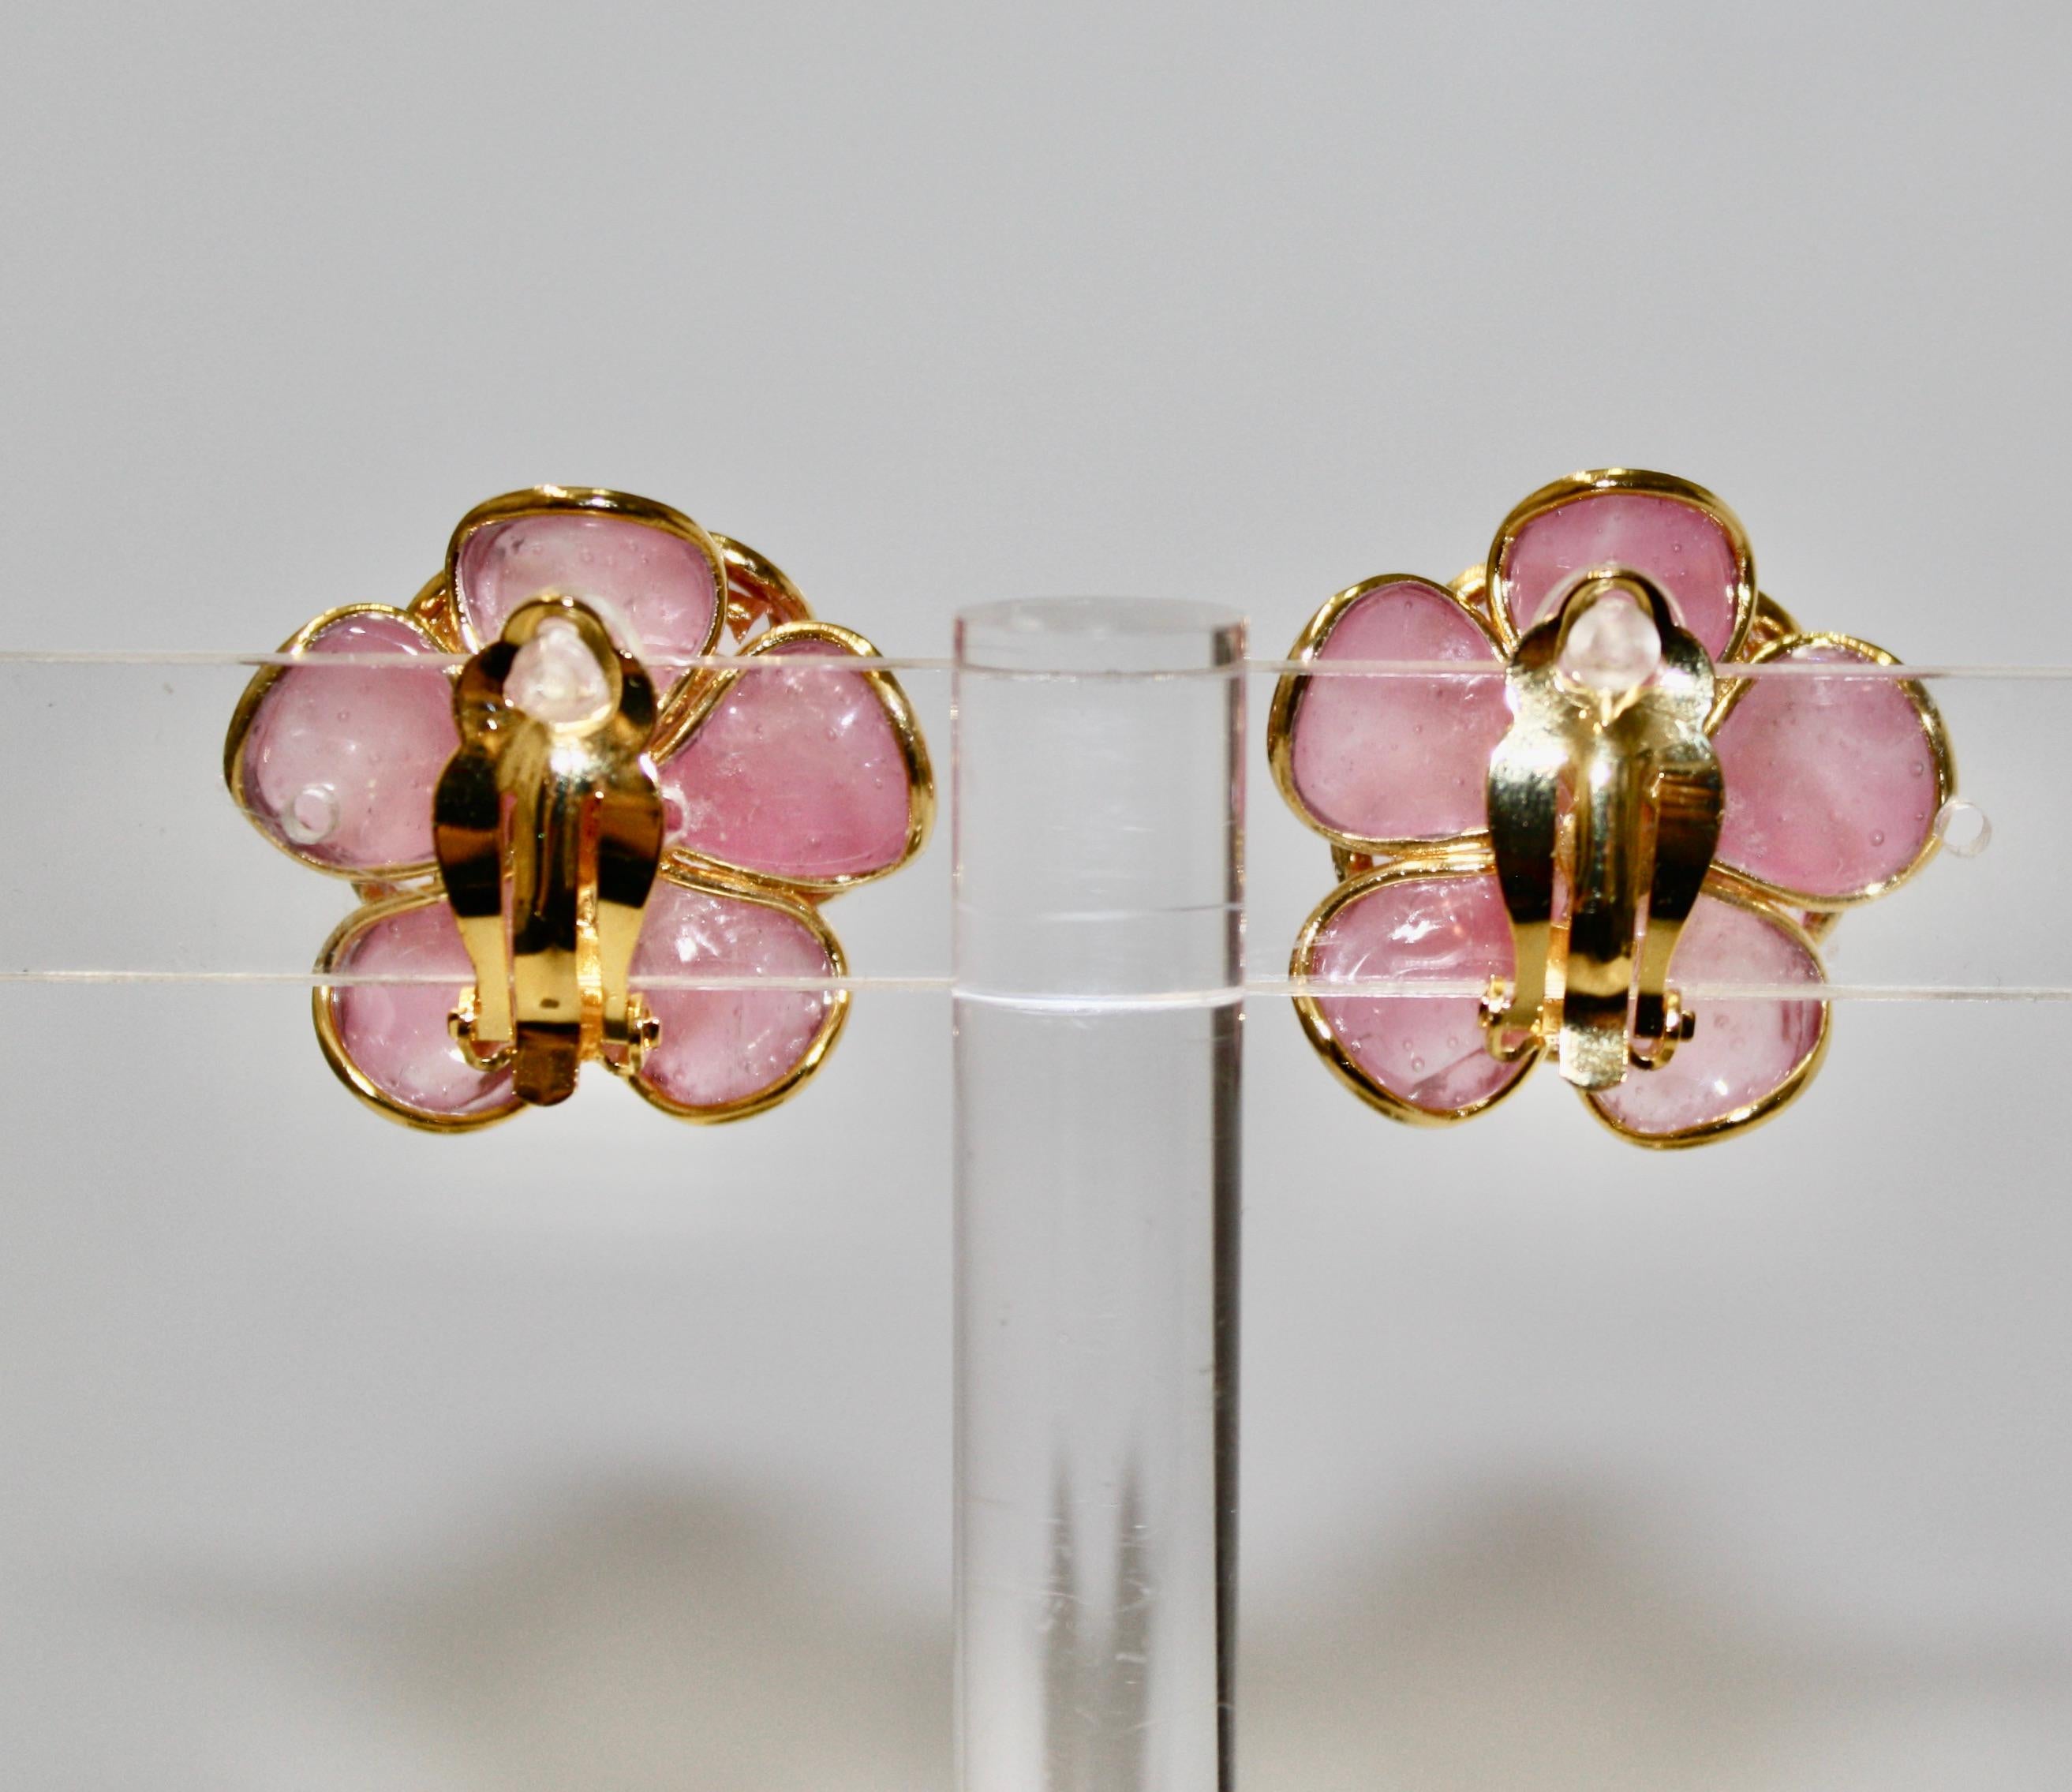 designed by the former artisans of the atelier of Gripoix, made in the special process of pate de verre or poured glass. Gold leaves are inserted in the glass. 18-carat gilded brass.
Clip earrings.